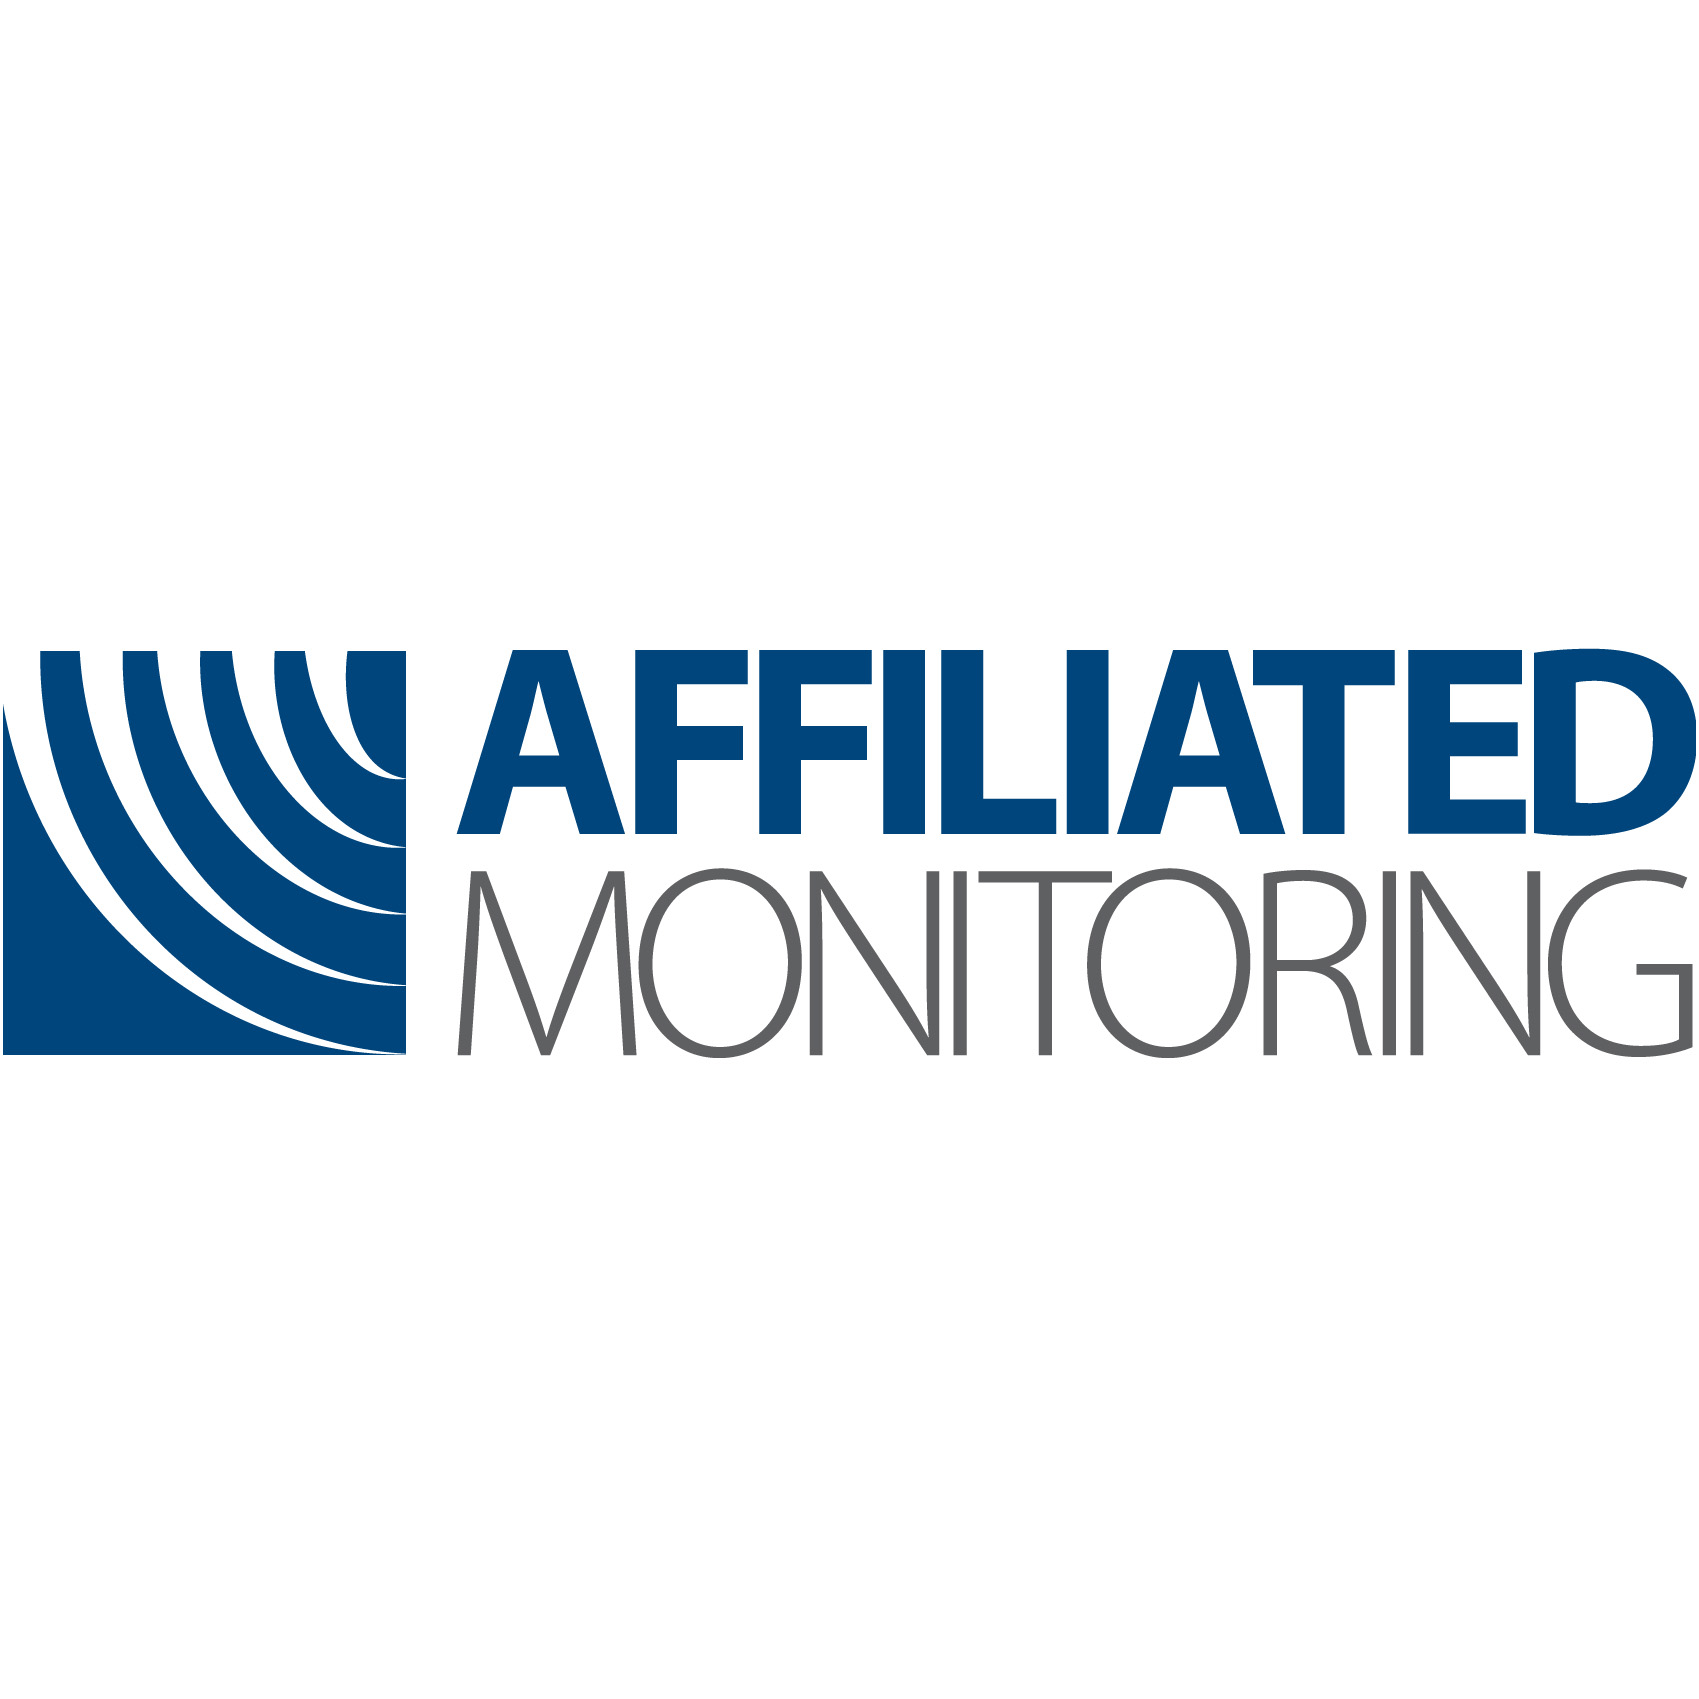 Affiliated Monitoring is the leading provider of live agent monitoring services and technology